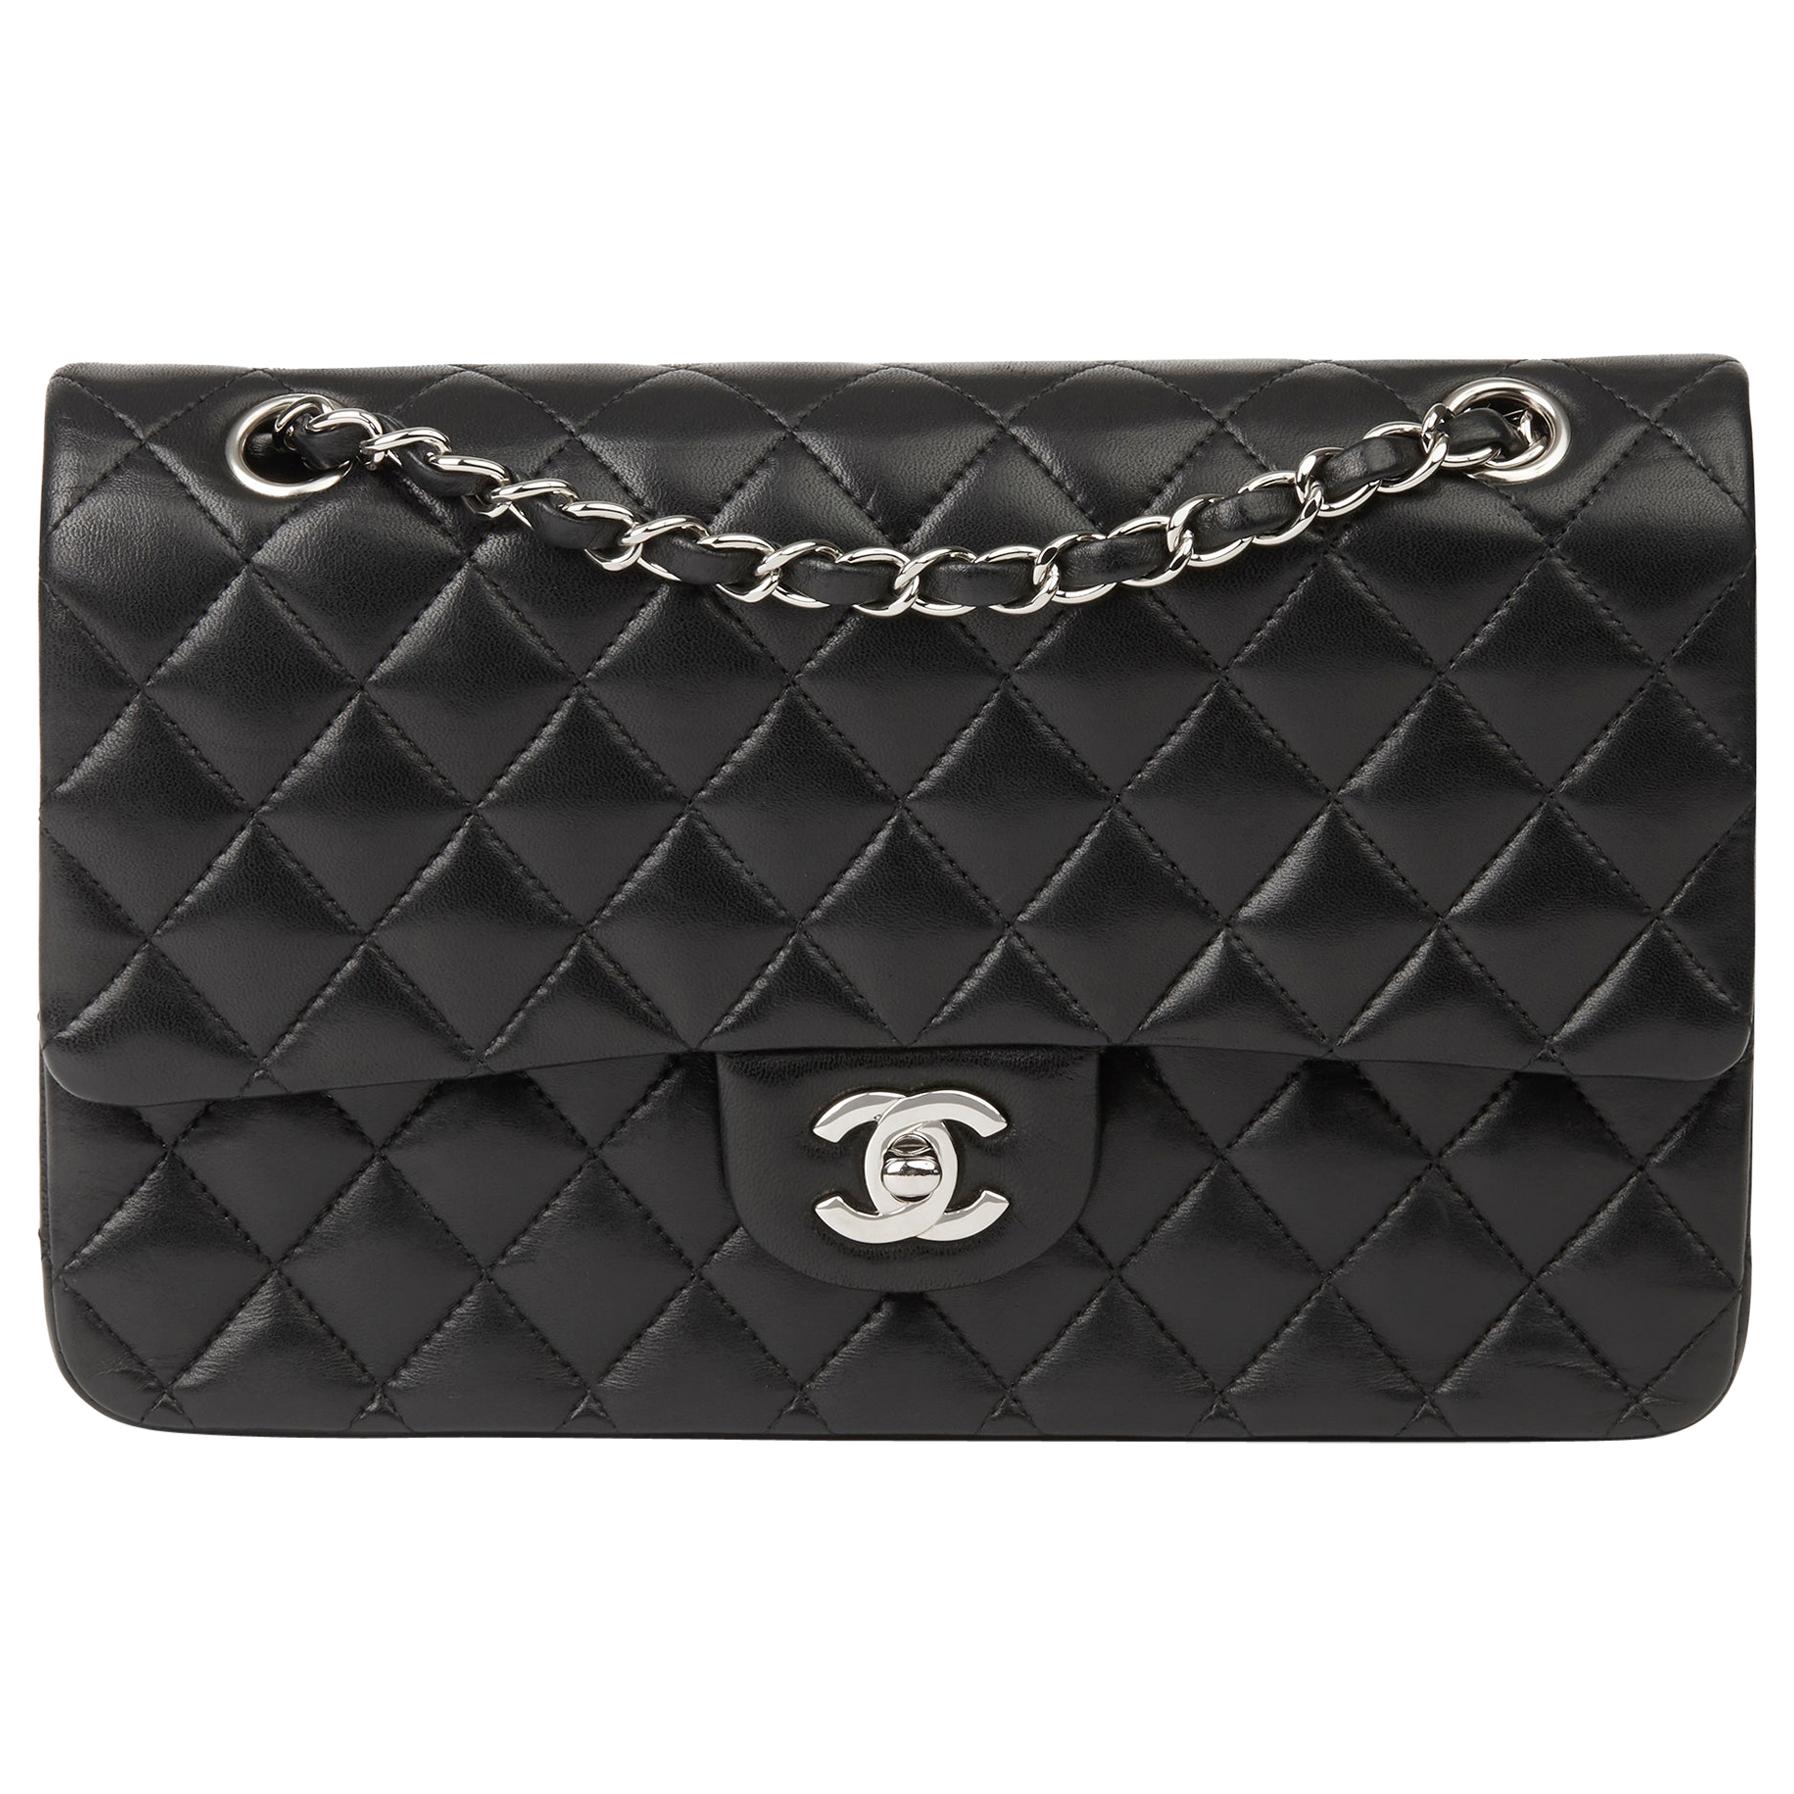 2010 Chanel Black Quilted Lambskin Medium Classic Double Flap Bag